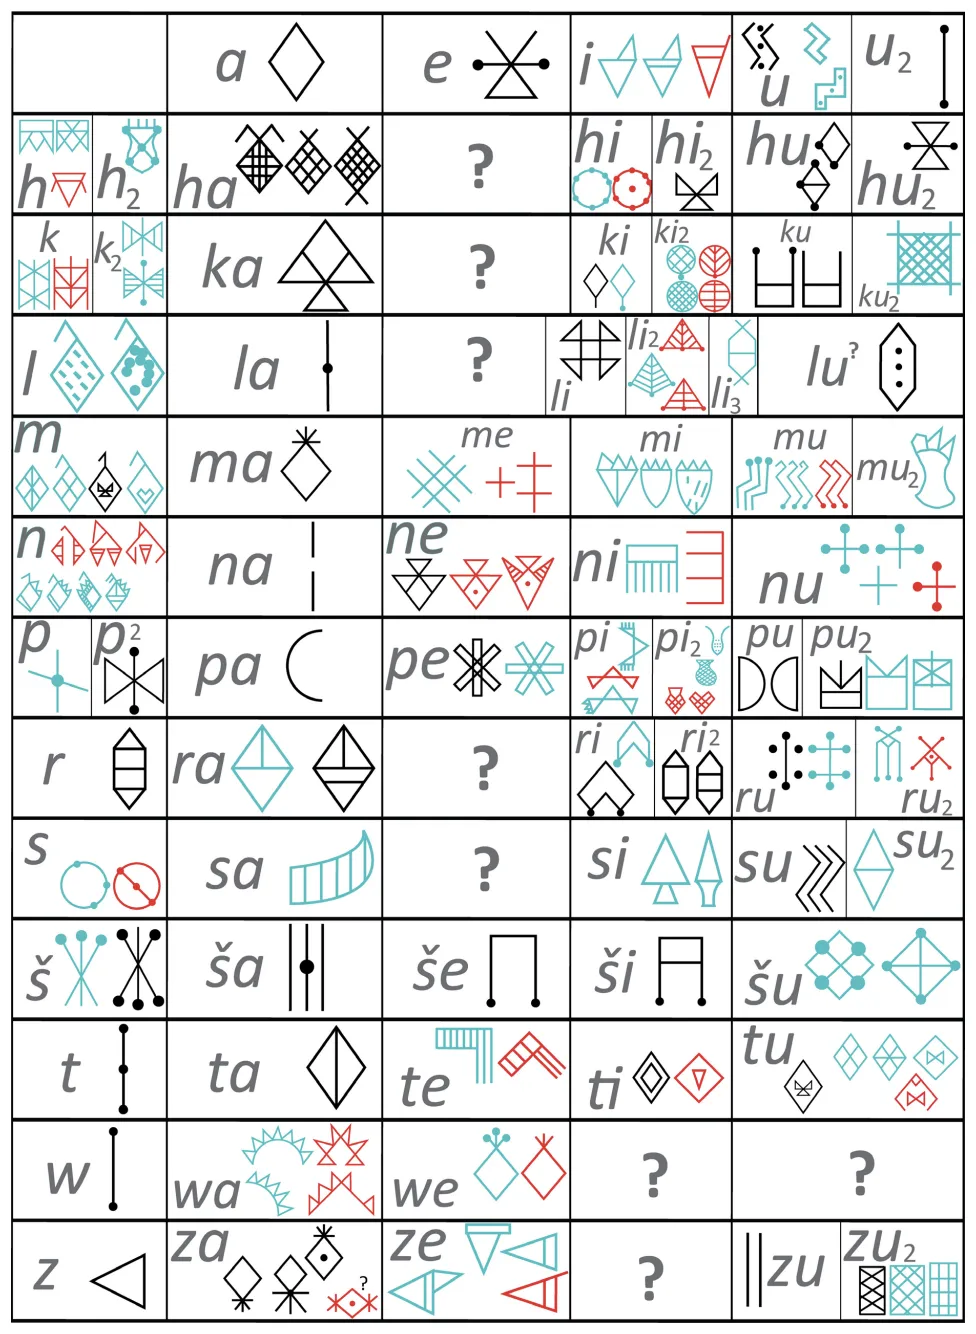 Grid of the 72 deciphered alpha-syllabic signs on which the transliteration system of Linear Elamite is based.